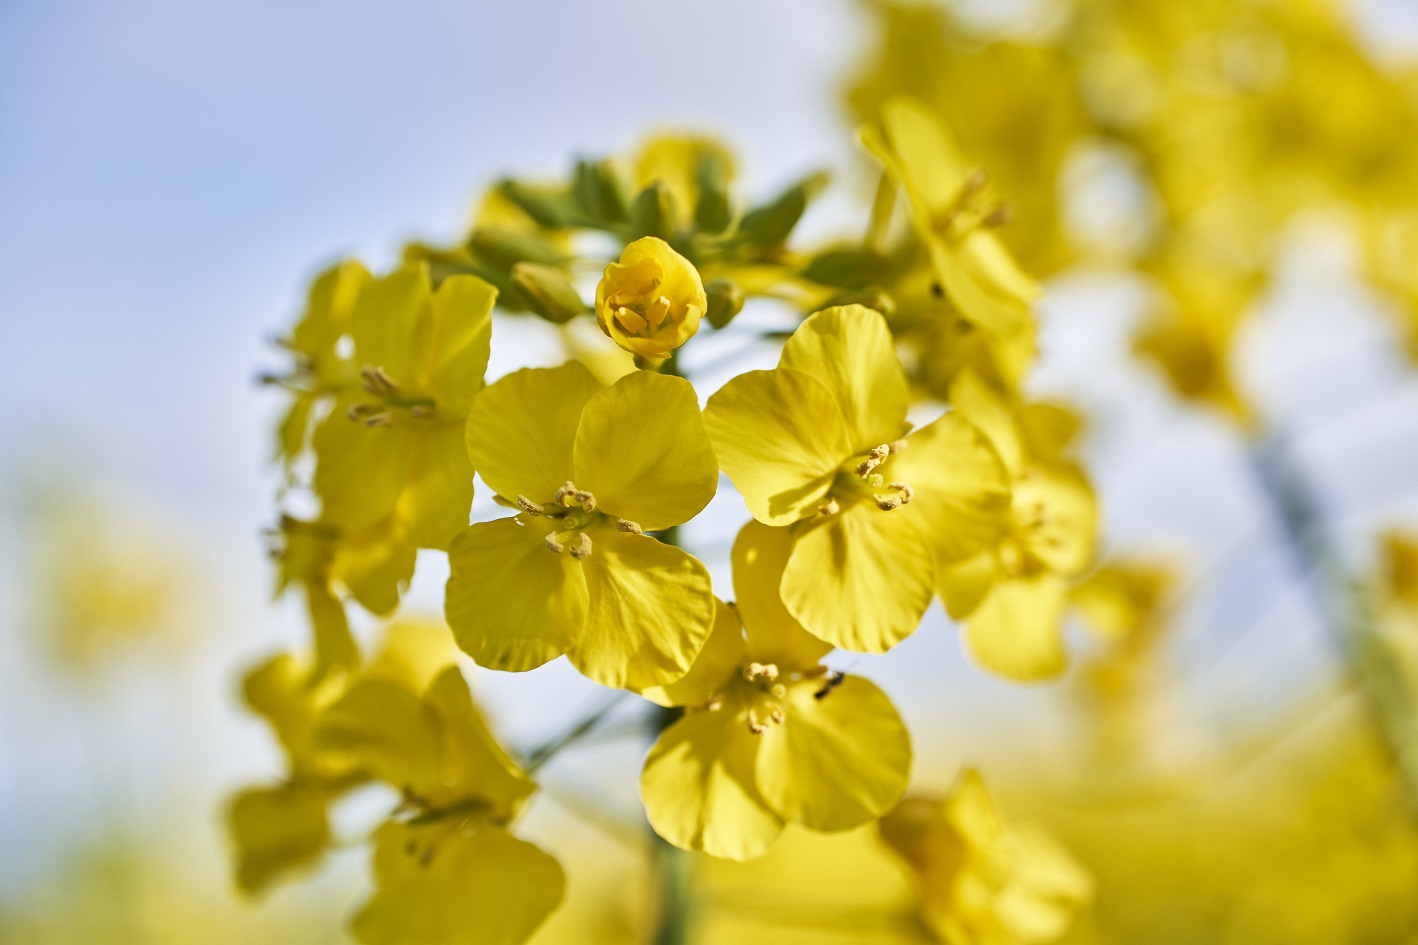 press-picture_rapeseed-in-blossom_(c)kws.jpg